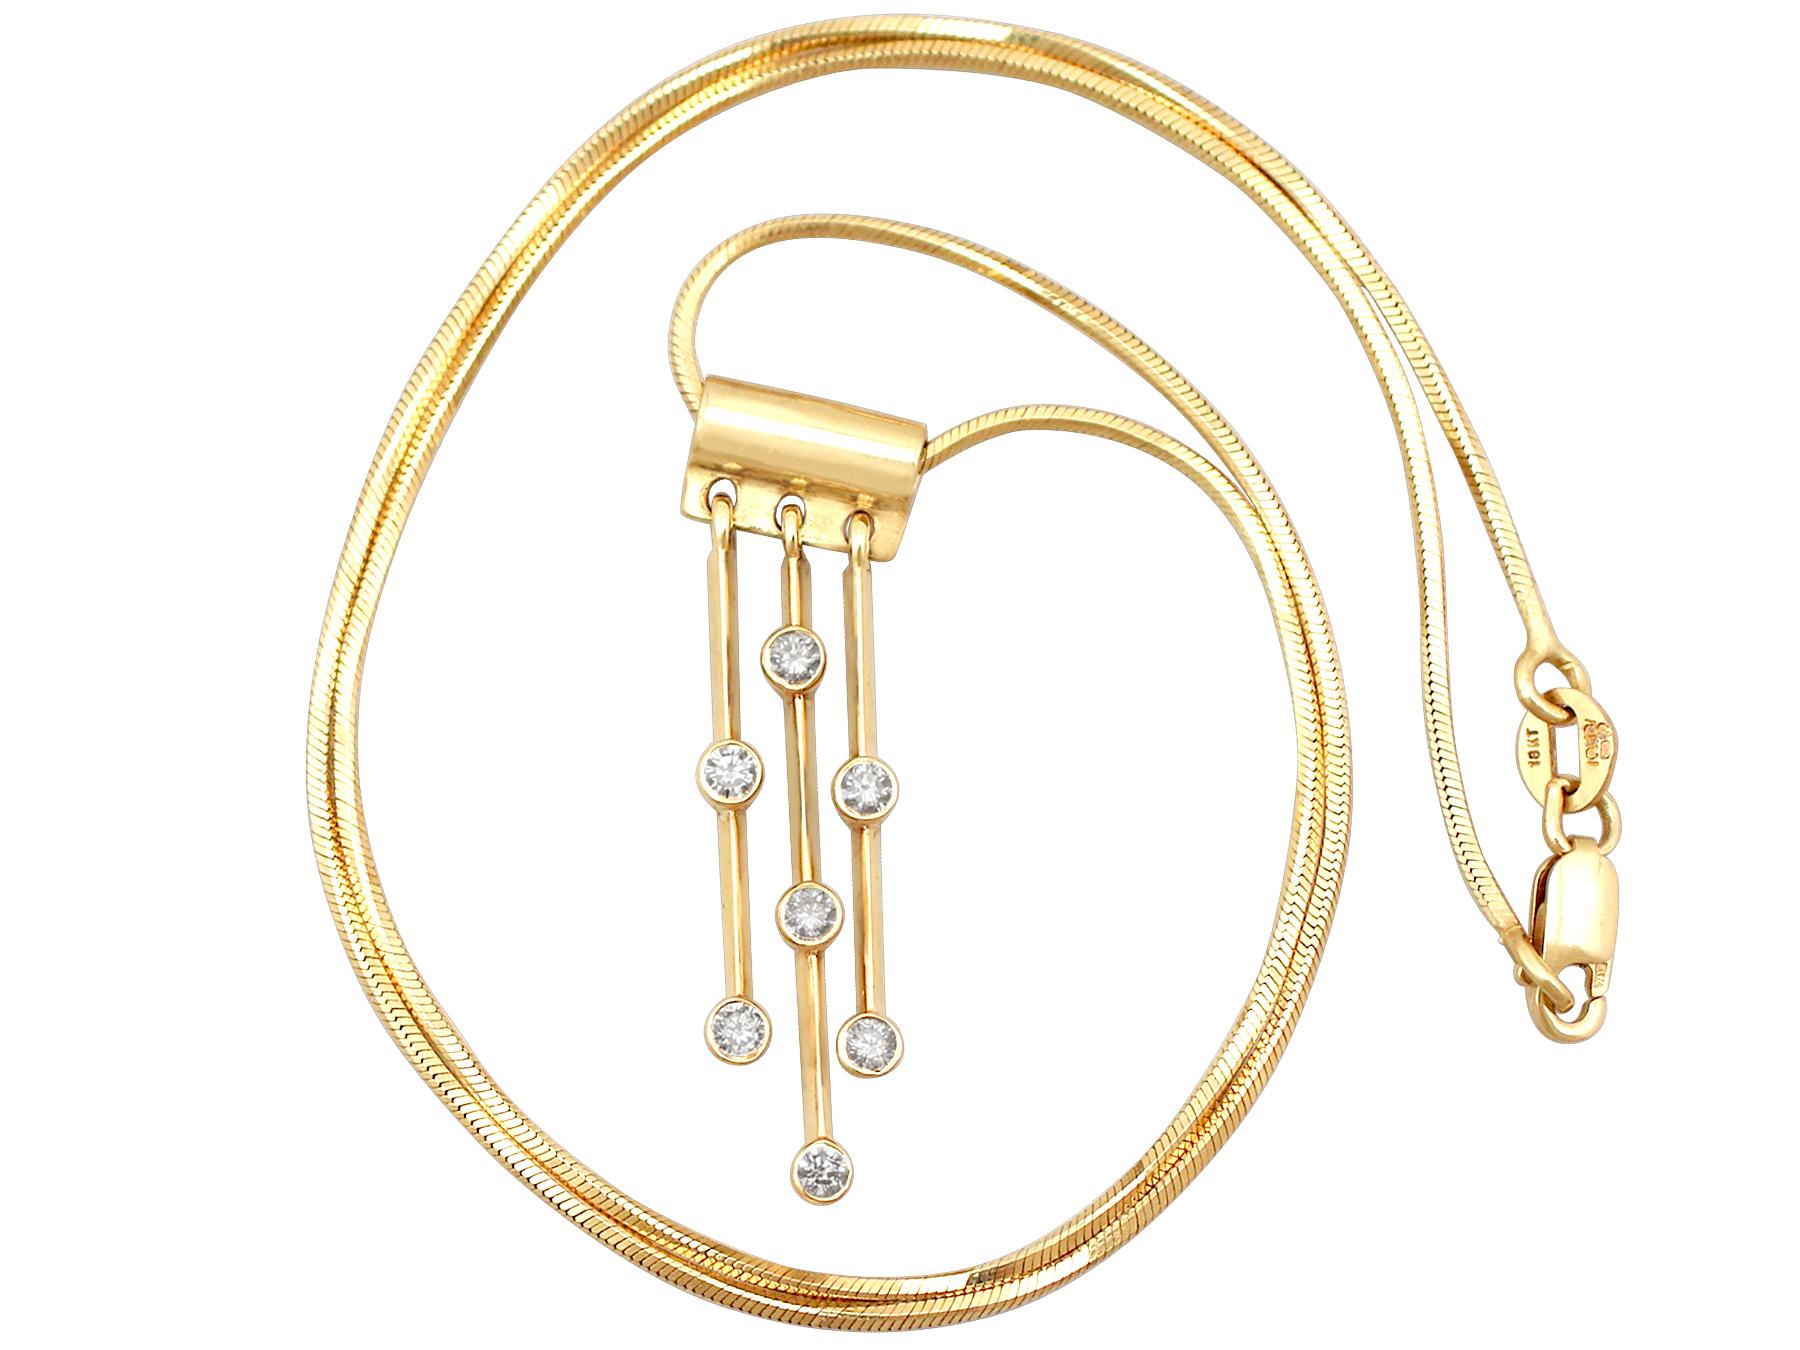 A fine and impressive vintage 0.33 carat diamond and 18 karat yellow gold drop pendant; part of our vintage jewelry and estate jewelry collections.

This impressive vintage diamond drop pendant has been crafted in 18k yellow gold.

The pendant